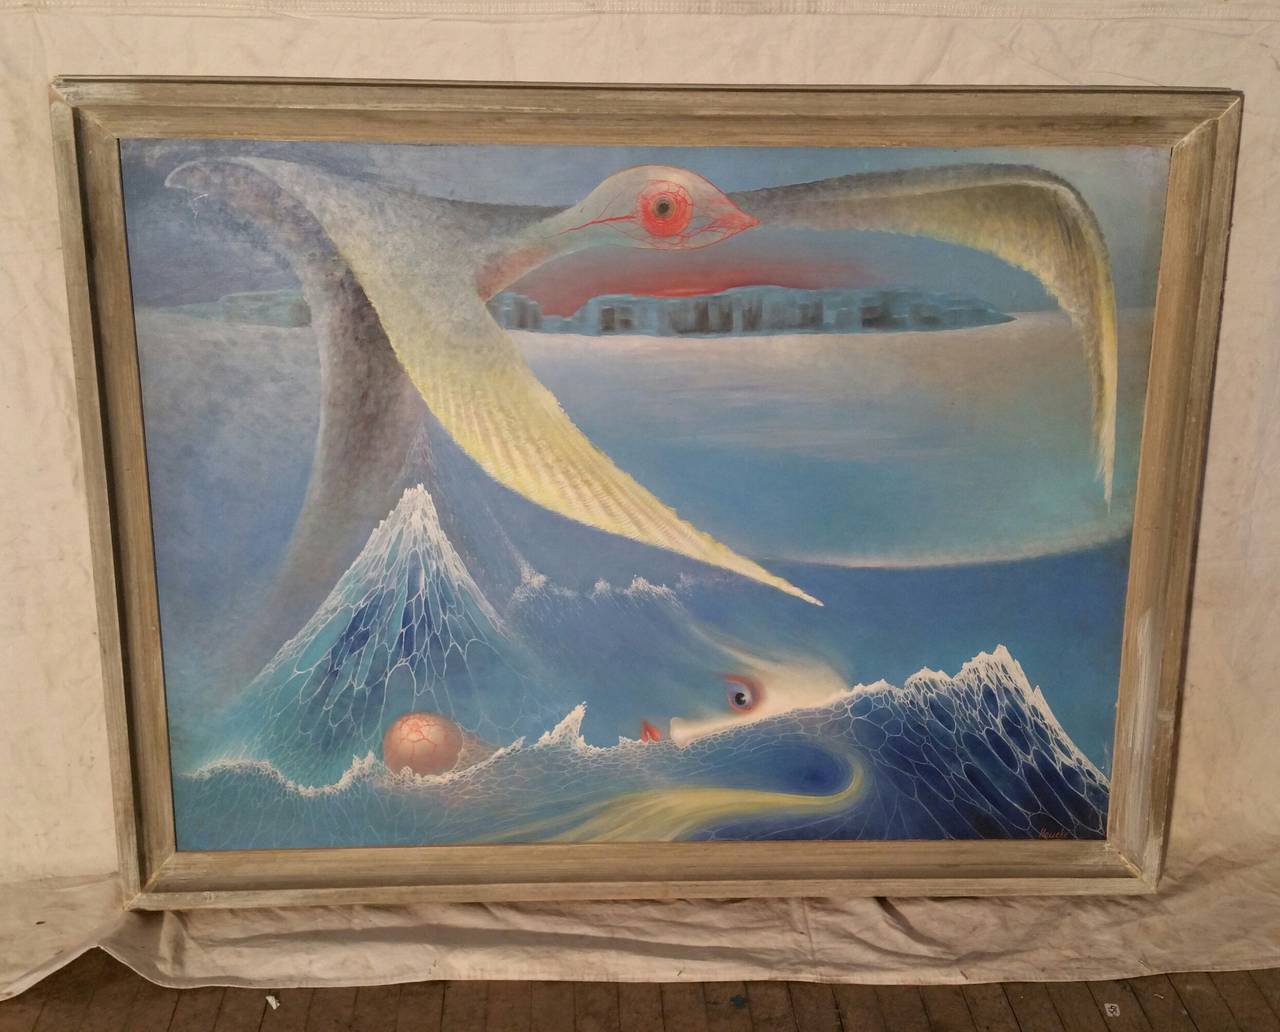 Surrealist Painting, Oil on Canvas by Frederick Haucke, 1908-1965 1